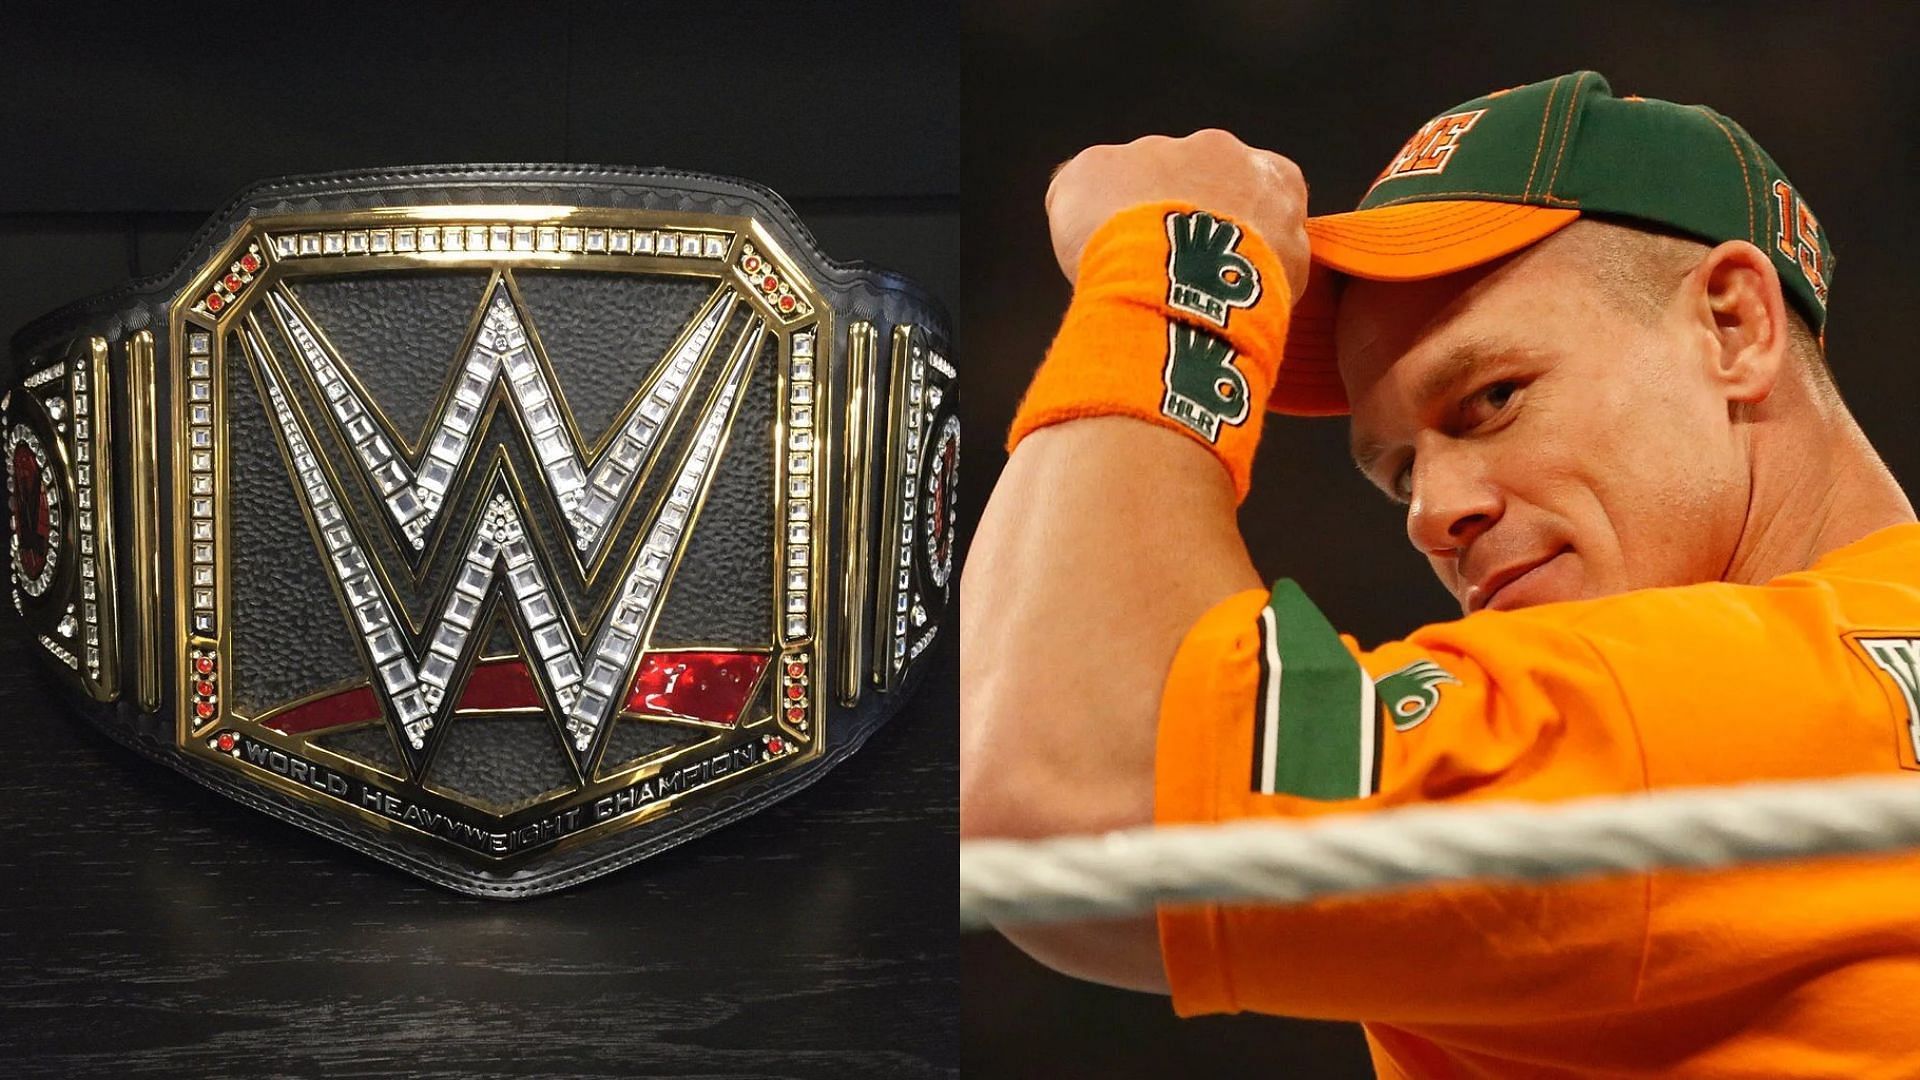 John Cena was once upon a time the WWE lock room leader